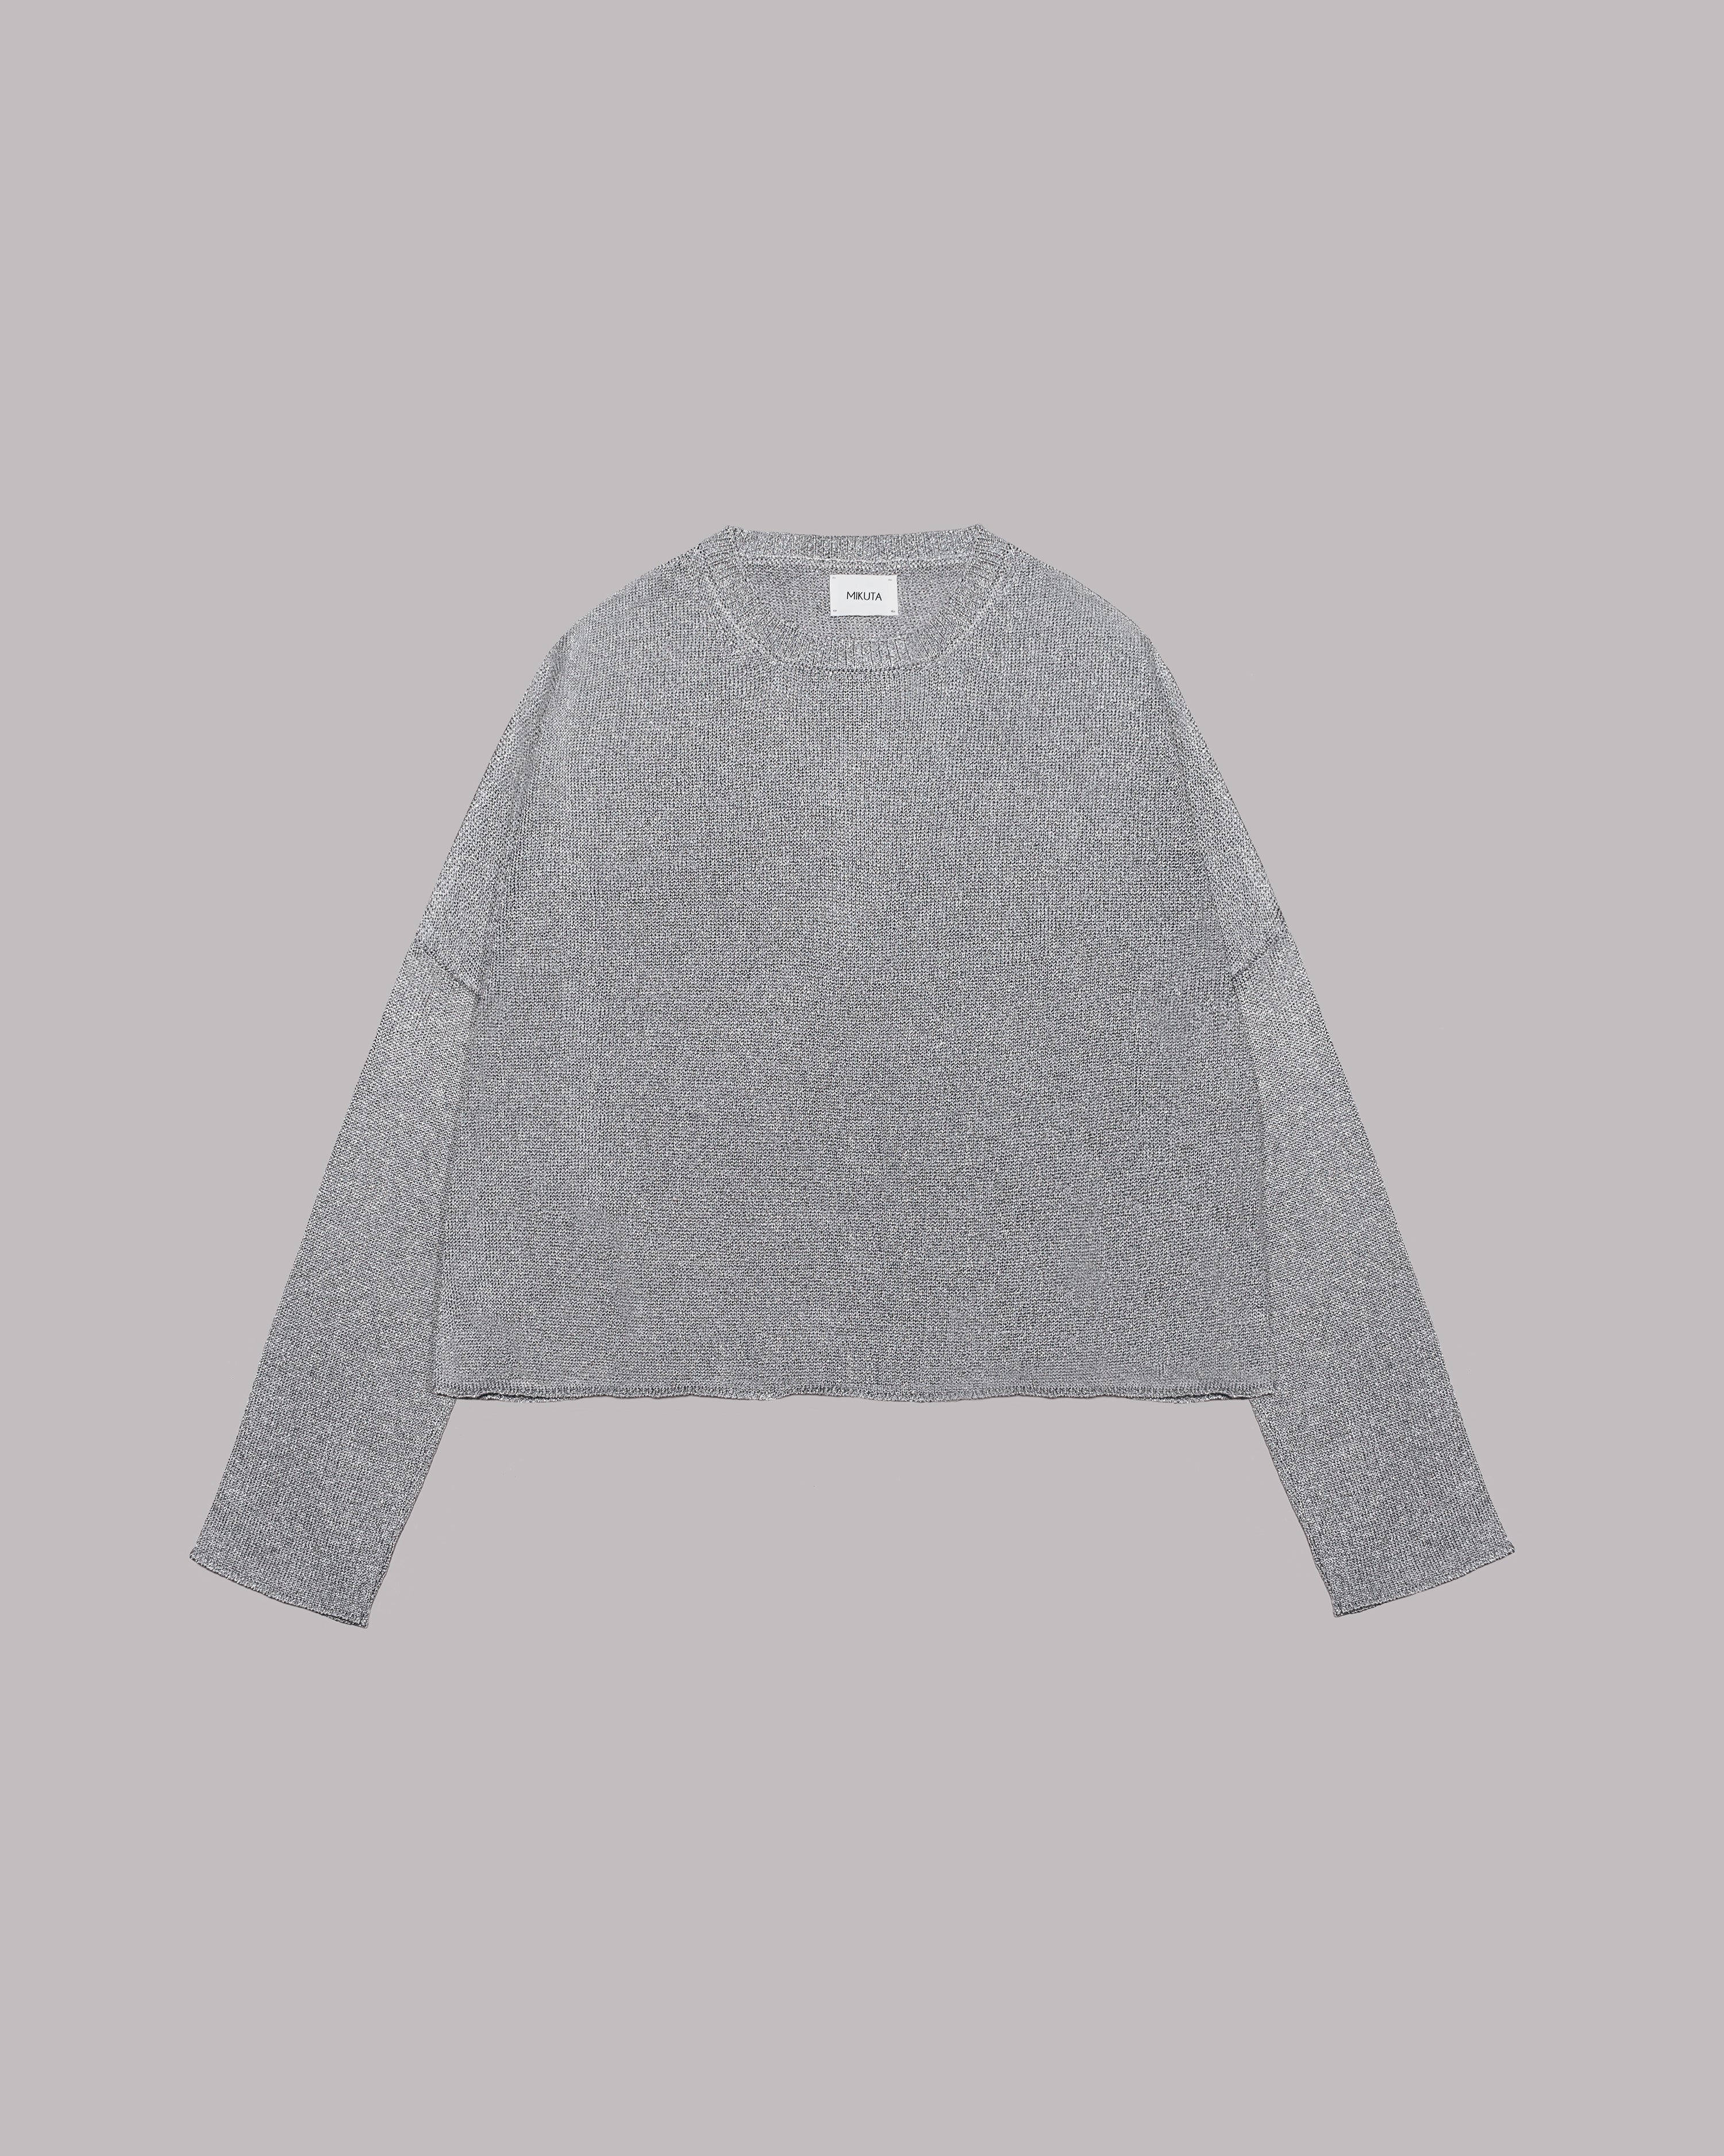 The Silver Sparkly Thin Knit Sweater